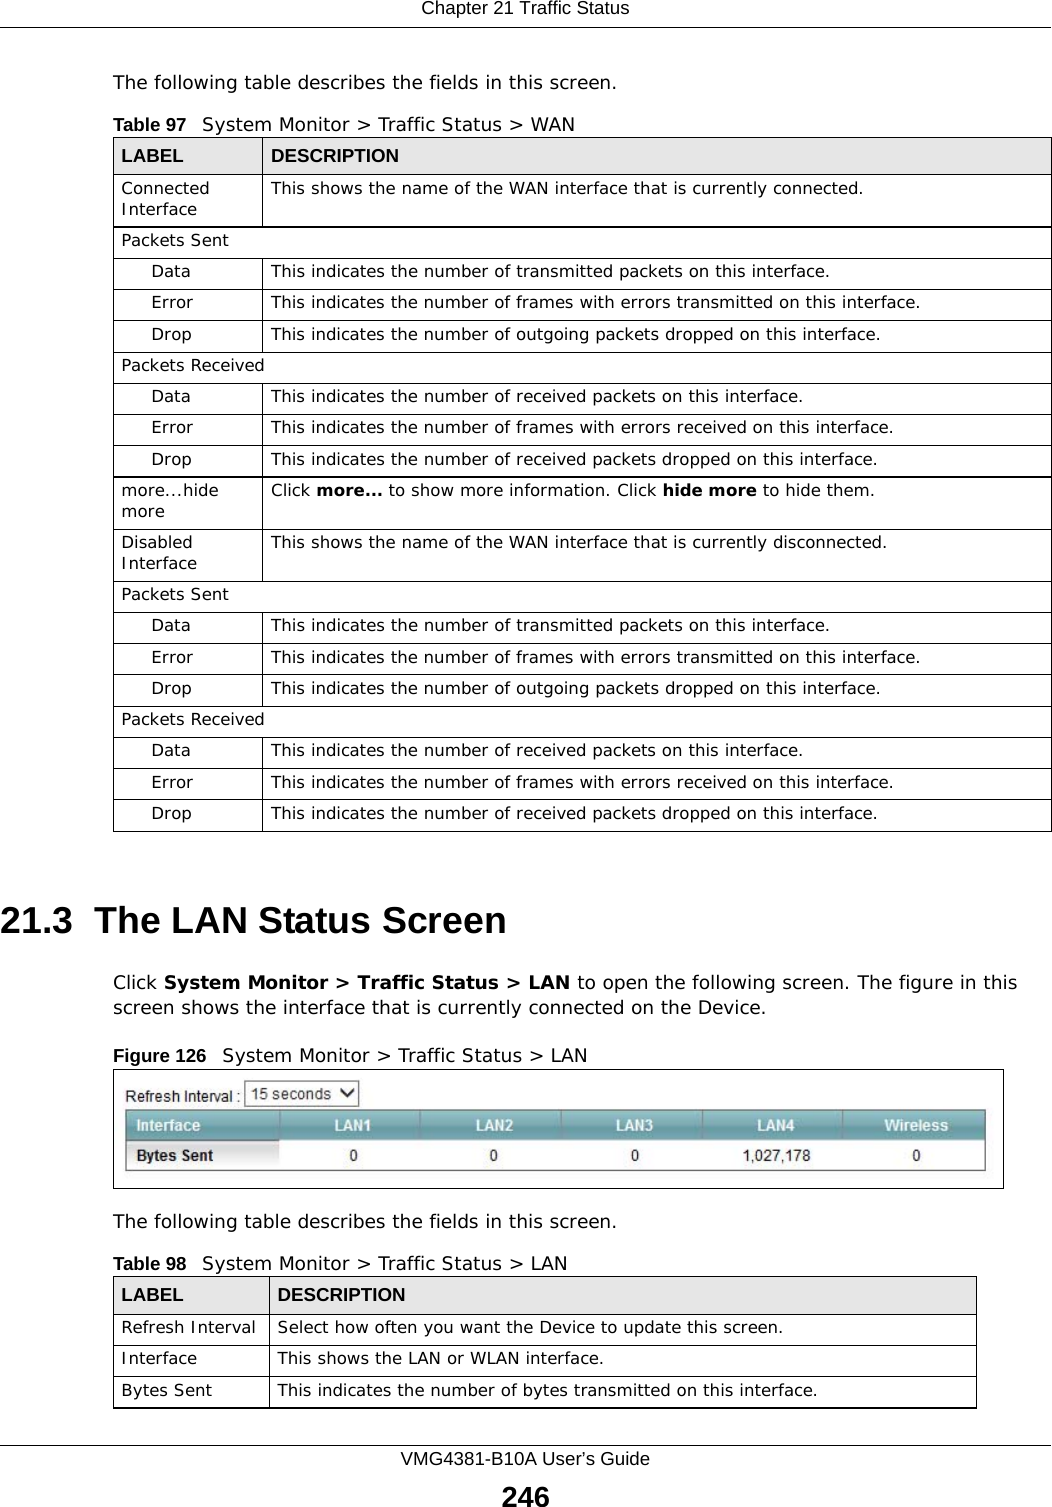 Chapter 21 Traffic StatusVMG4381-B10A User’s Guide246The following table describes the fields in this screen.   21.3  The LAN Status ScreenClick System Monitor &gt; Traffic Status &gt; LAN to open the following screen. The figure in this screen shows the interface that is currently connected on the Device.Figure 126   System Monitor &gt; Traffic Status &gt; LANThe following table describes the fields in this screen.   Table 97   System Monitor &gt; Traffic Status &gt; WANLABEL DESCRIPTIONConnected Interface  This shows the name of the WAN interface that is currently connected.Packets Sent Data  This indicates the number of transmitted packets on this interface.Error This indicates the number of frames with errors transmitted on this interface.Drop This indicates the number of outgoing packets dropped on this interface.Packets ReceivedData  This indicates the number of received packets on this interface.Error This indicates the number of frames with errors received on this interface.Drop This indicates the number of received packets dropped on this interface.more...hide more Click more... to show more information. Click hide more to hide them.Disabled Interface This shows the name of the WAN interface that is currently disconnected.Packets Sent Data  This indicates the number of transmitted packets on this interface.Error This indicates the number of frames with errors transmitted on this interface.Drop This indicates the number of outgoing packets dropped on this interface.Packets ReceivedData  This indicates the number of received packets on this interface.Error This indicates the number of frames with errors received on this interface.Drop This indicates the number of received packets dropped on this interface.Table 98   System Monitor &gt; Traffic Status &gt; LANLABEL DESCRIPTIONRefresh Interval Select how often you want the Device to update this screen.Interface This shows the LAN or WLAN interface. Bytes Sent This indicates the number of bytes transmitted on this interface.